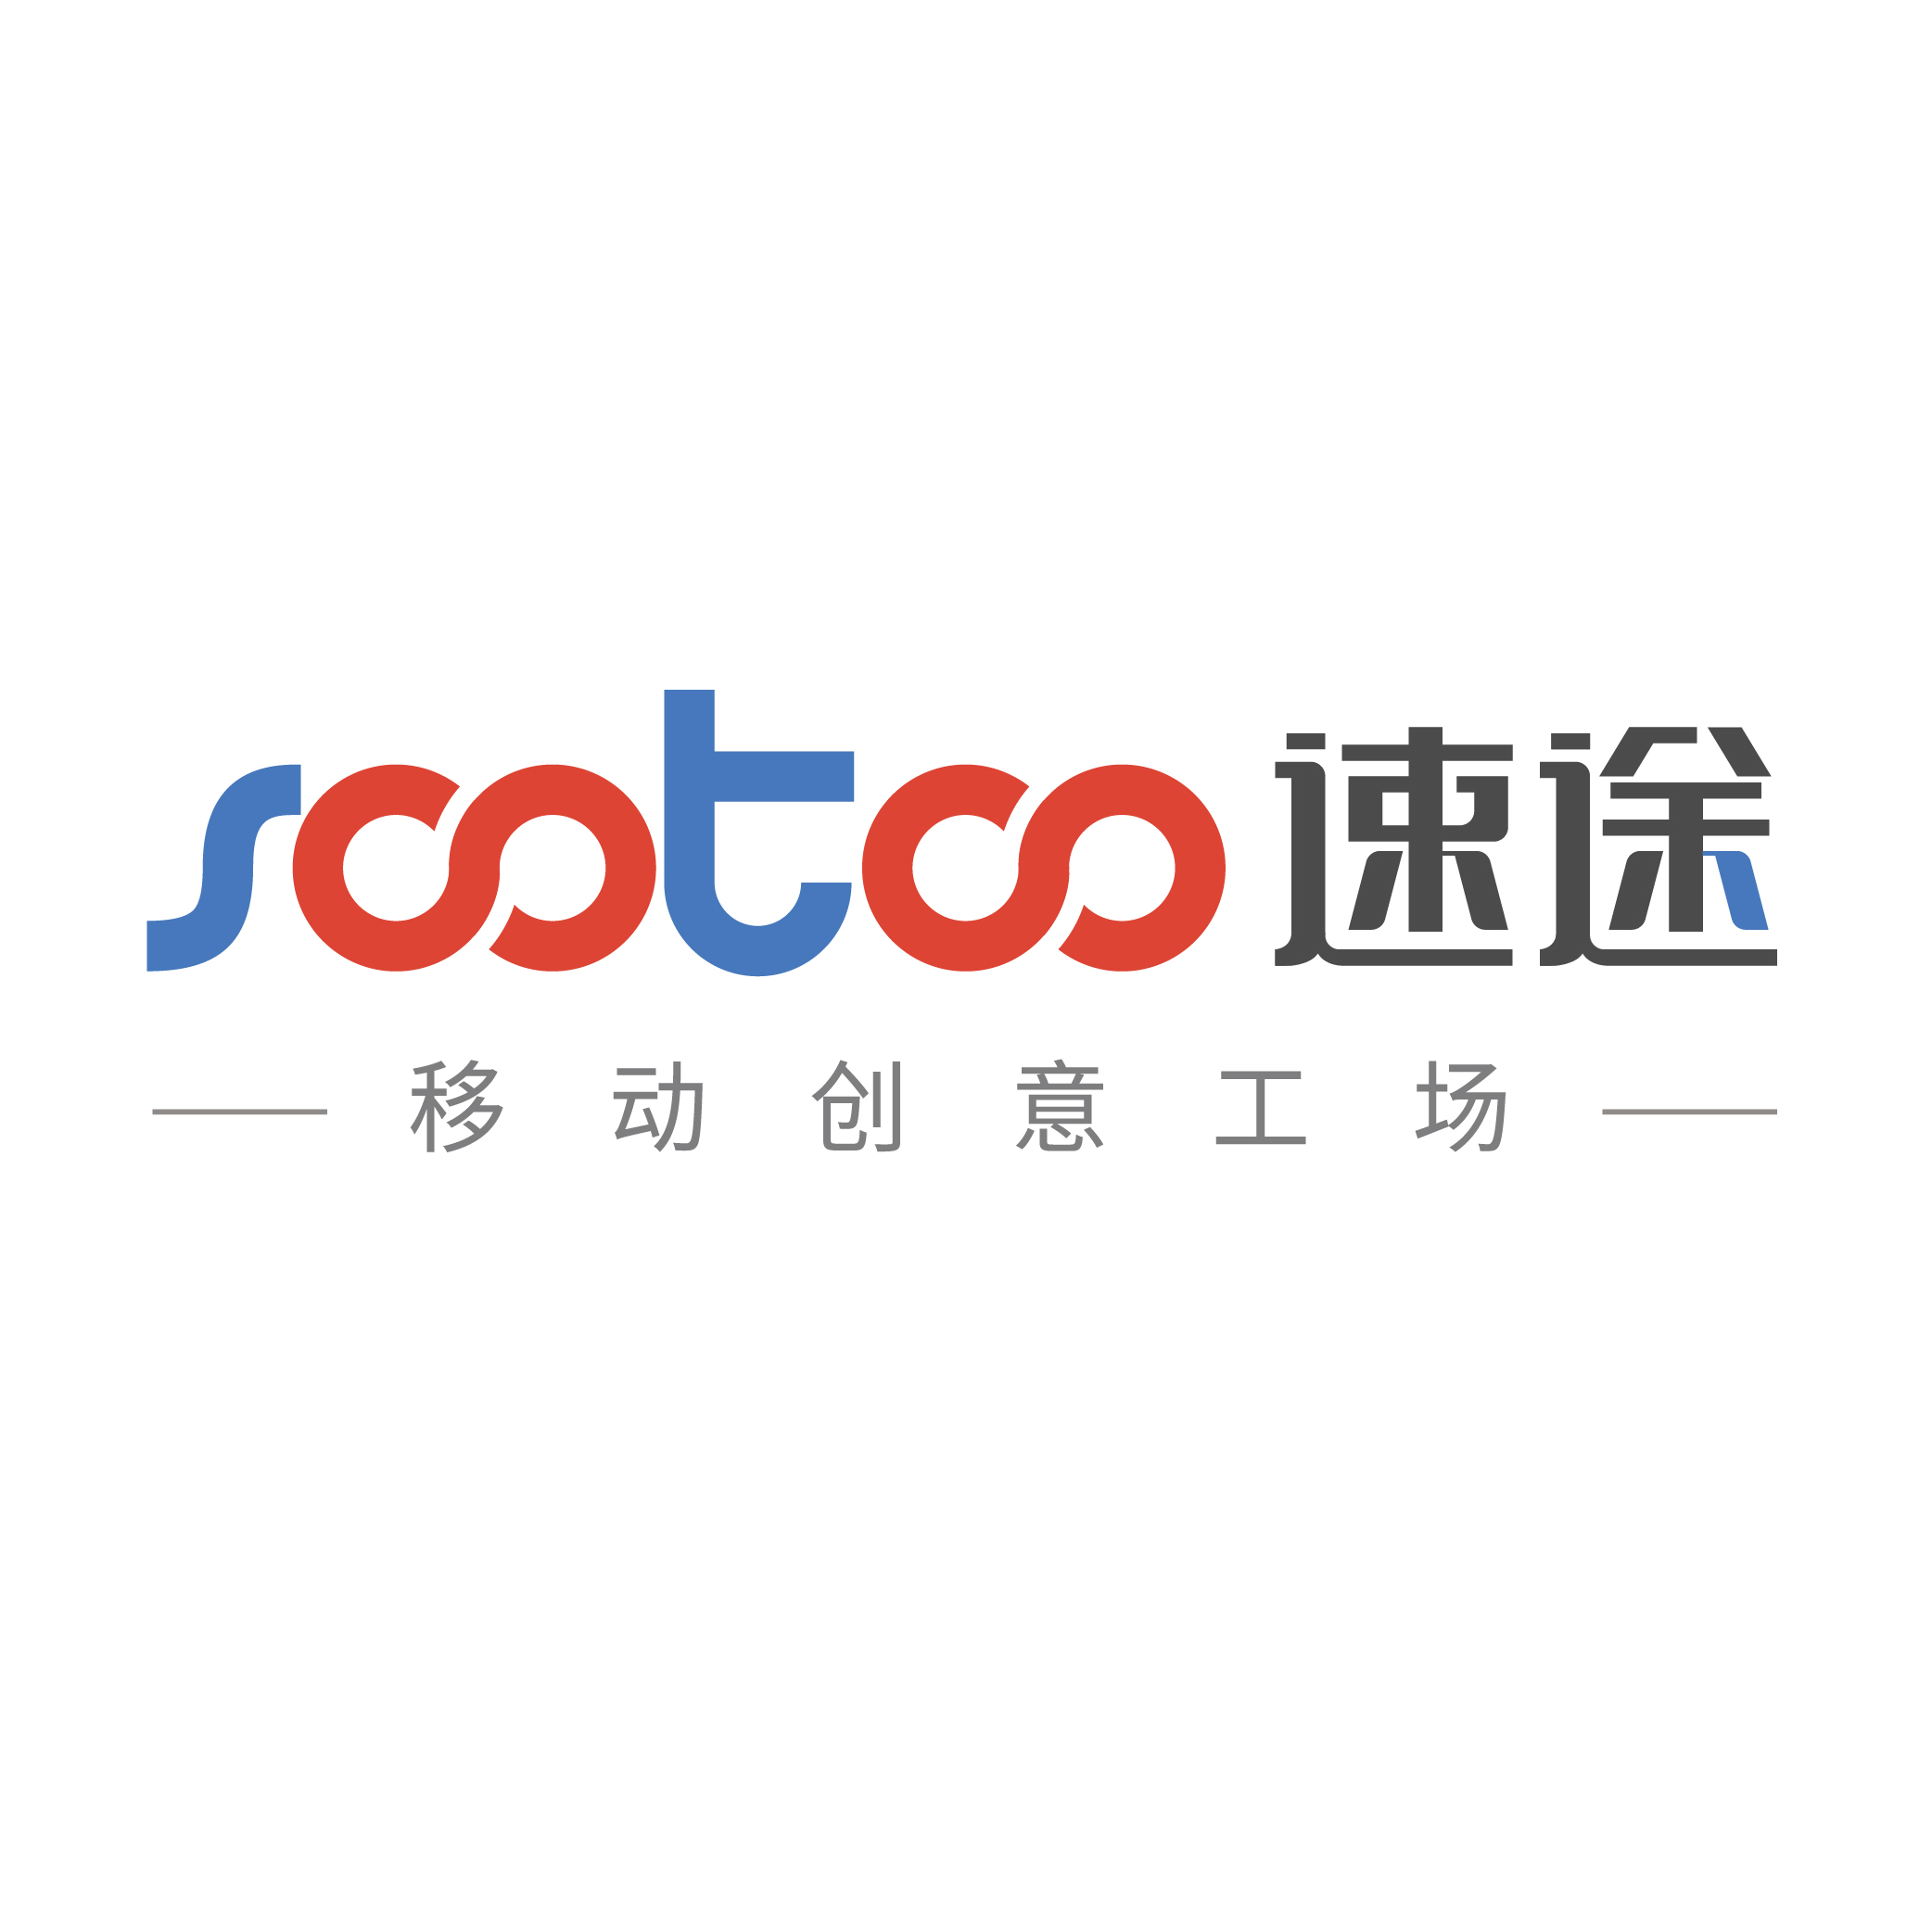 Sootoo Network